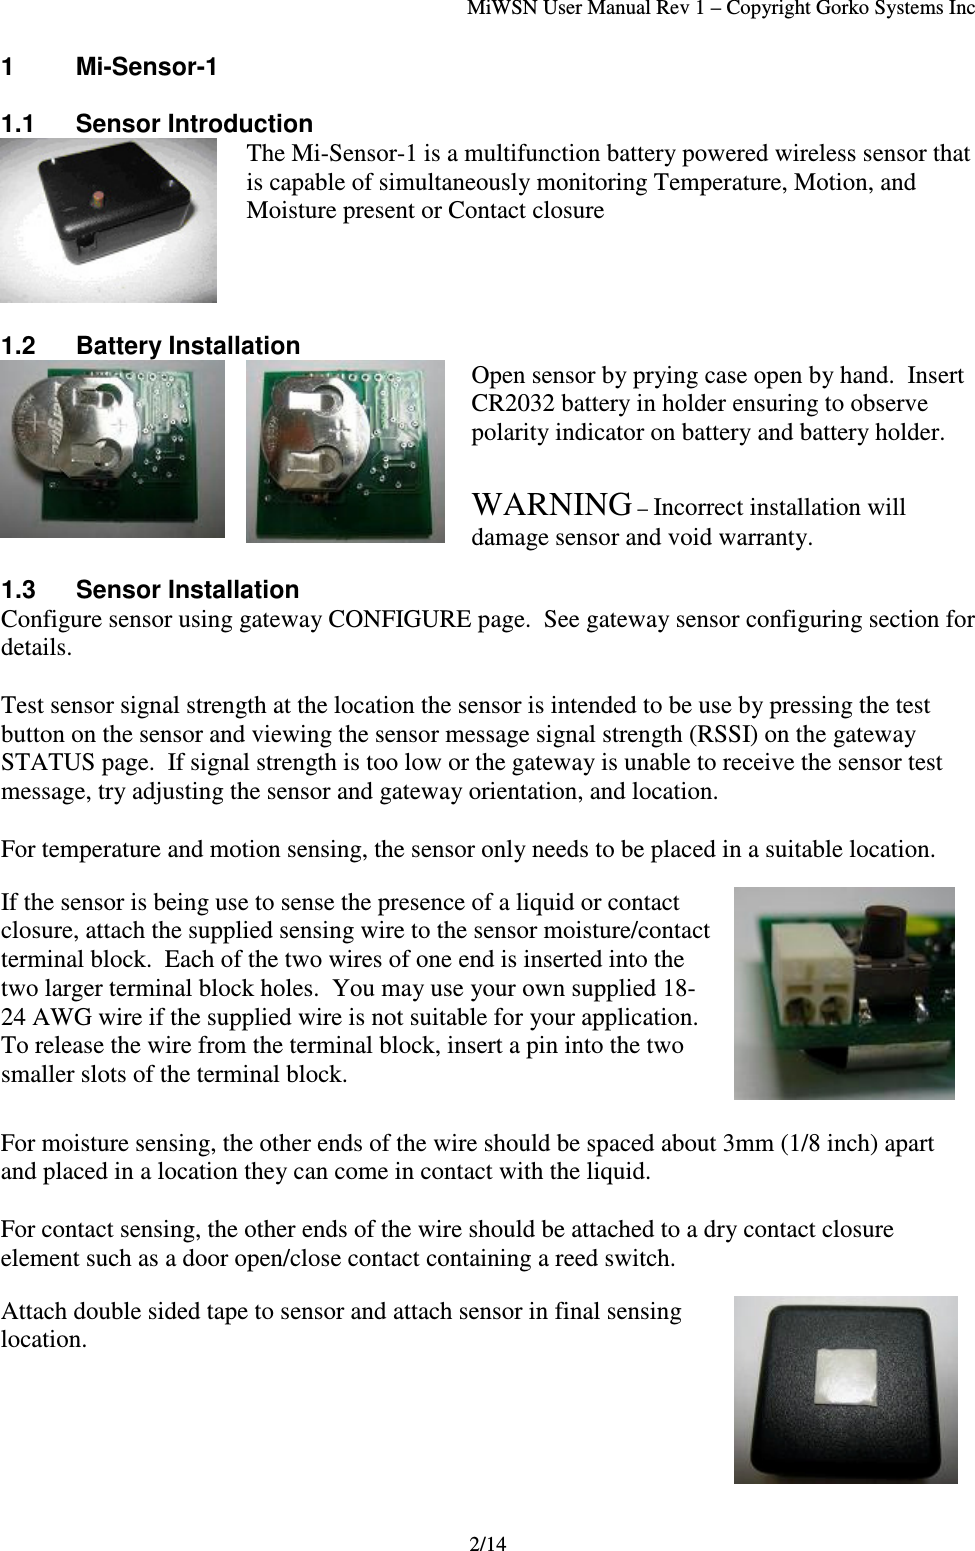 MiWSN User Manual Rev 1 – Copyright Gorko Systems Inc2/141 Mi-Sensor-11.1  Sensor IntroductionThe Mi-Sensor-1 is a multifunction battery powered wireless sensor thatis capable of simultaneously monitoring Temperature, Motion, andMoisture present or Contact closure1.2 Battery InstallationOpen sensor by prying case open by hand.  InsertCR2032 battery in holder ensuring to observepolarity indicator on battery and battery holder.WARNING – Incorrect installation willdamage sensor and void warranty.1.3 Sensor InstallationConfigure sensor using gateway CONFIGURE page.  See gateway sensor configuring section fordetails.Test sensor signal strength at the location the sensor is intended to be use by pressing the testbutton on the sensor and viewing the sensor message signal strength (RSSI) on the gatewaySTATUS page.  If signal strength is too low or the gateway is unable to receive the sensor testmessage, try adjusting the sensor and gateway orientation, and location.For temperature and motion sensing, the sensor only needs to be placed in a suitable location.If the sensor is being use to sense the presence of a liquid or contactclosure, attach the supplied sensing wire to the sensor moisture/contactterminal block.  Each of the two wires of one end is inserted into thetwo larger terminal block holes.  You may use your own supplied 18-24 AWG wire if the supplied wire is not suitable for your application.To release the wire from the terminal block, insert a pin into the twosmaller slots of the terminal block.For moisture sensing, the other ends of the wire should be spaced about 3mm (1/8 inch) apartand placed in a location they can come in contact with the liquid.For contact sensing, the other ends of the wire should be attached to a dry contact closureelement such as a door open/close contact containing a reed switch.Attach double sided tape to sensor and attach sensor in final sensinglocation.